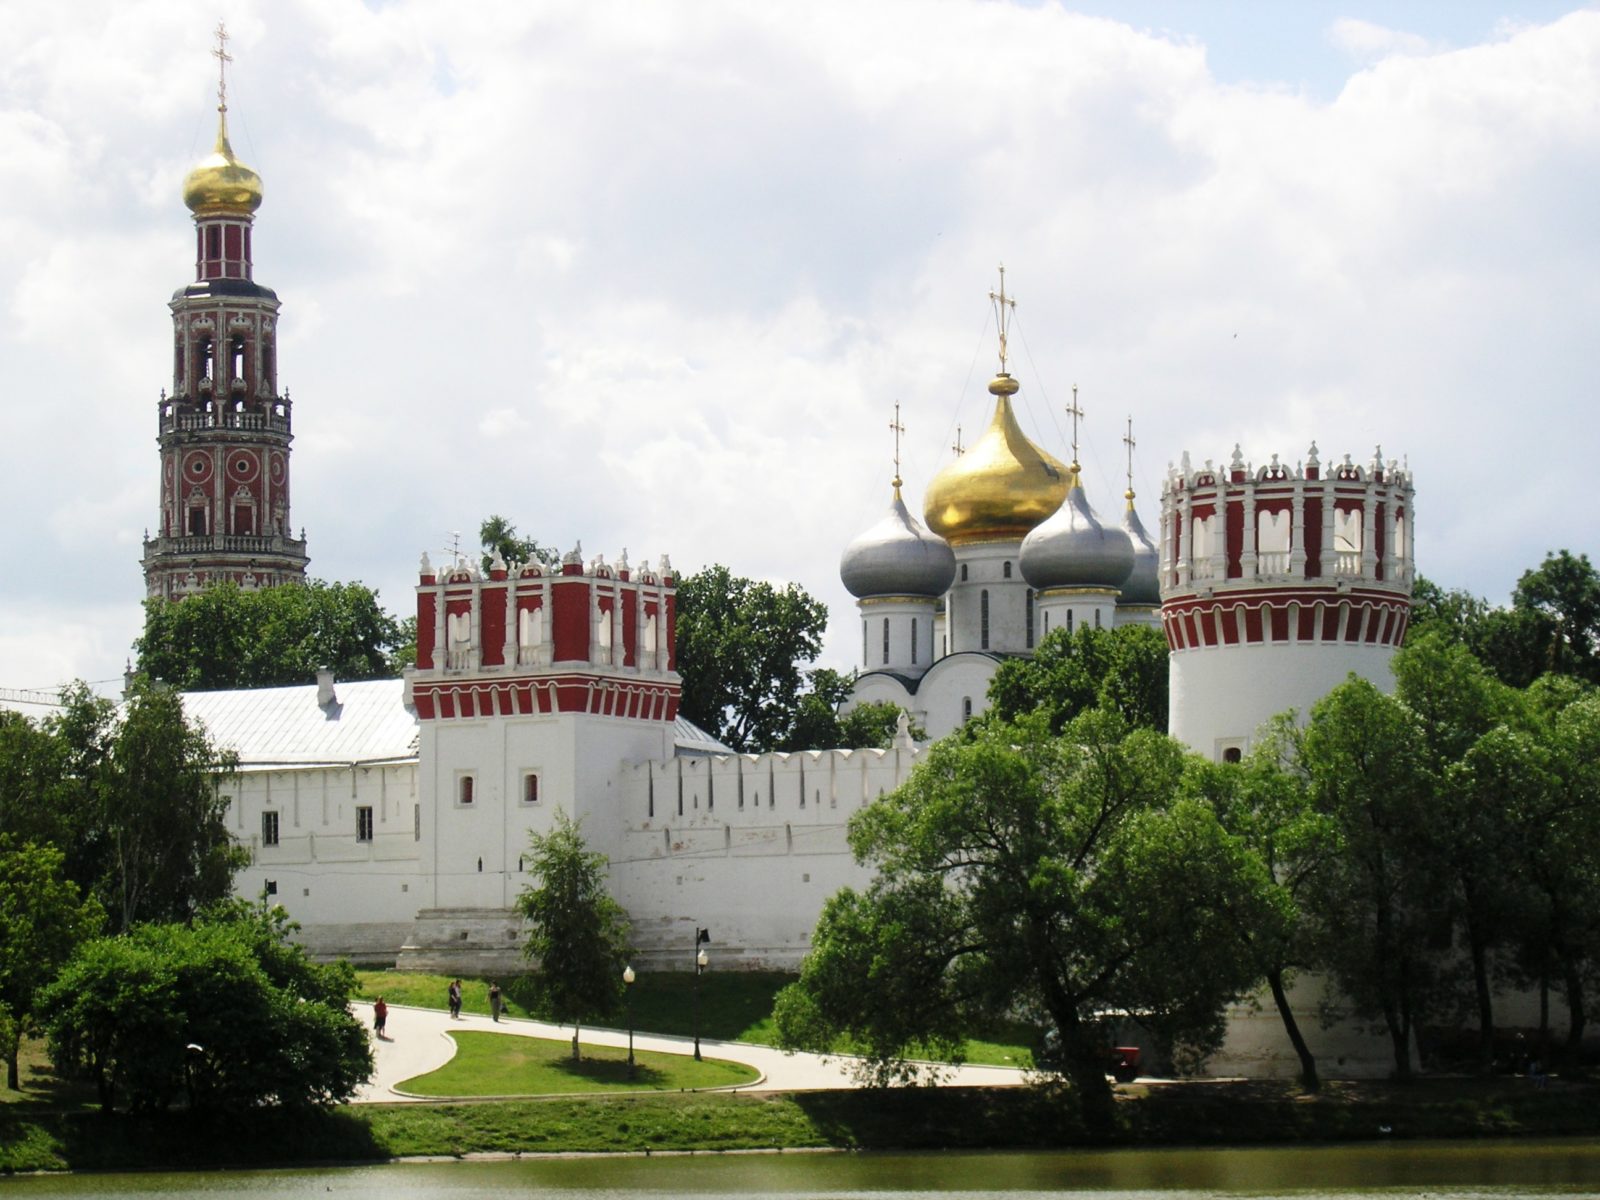 Novodevichy Convent, Novodevichy Cemetry, Novodevichy in winter, Novodevichy in summer, excursions in Moscow, excursions in English, tour, guided tour to Novodevichy, excursions in a group, Nikulin grave, Bulgakov grave, Chekhov grave, Peter the Great, Peter's sister Sophia